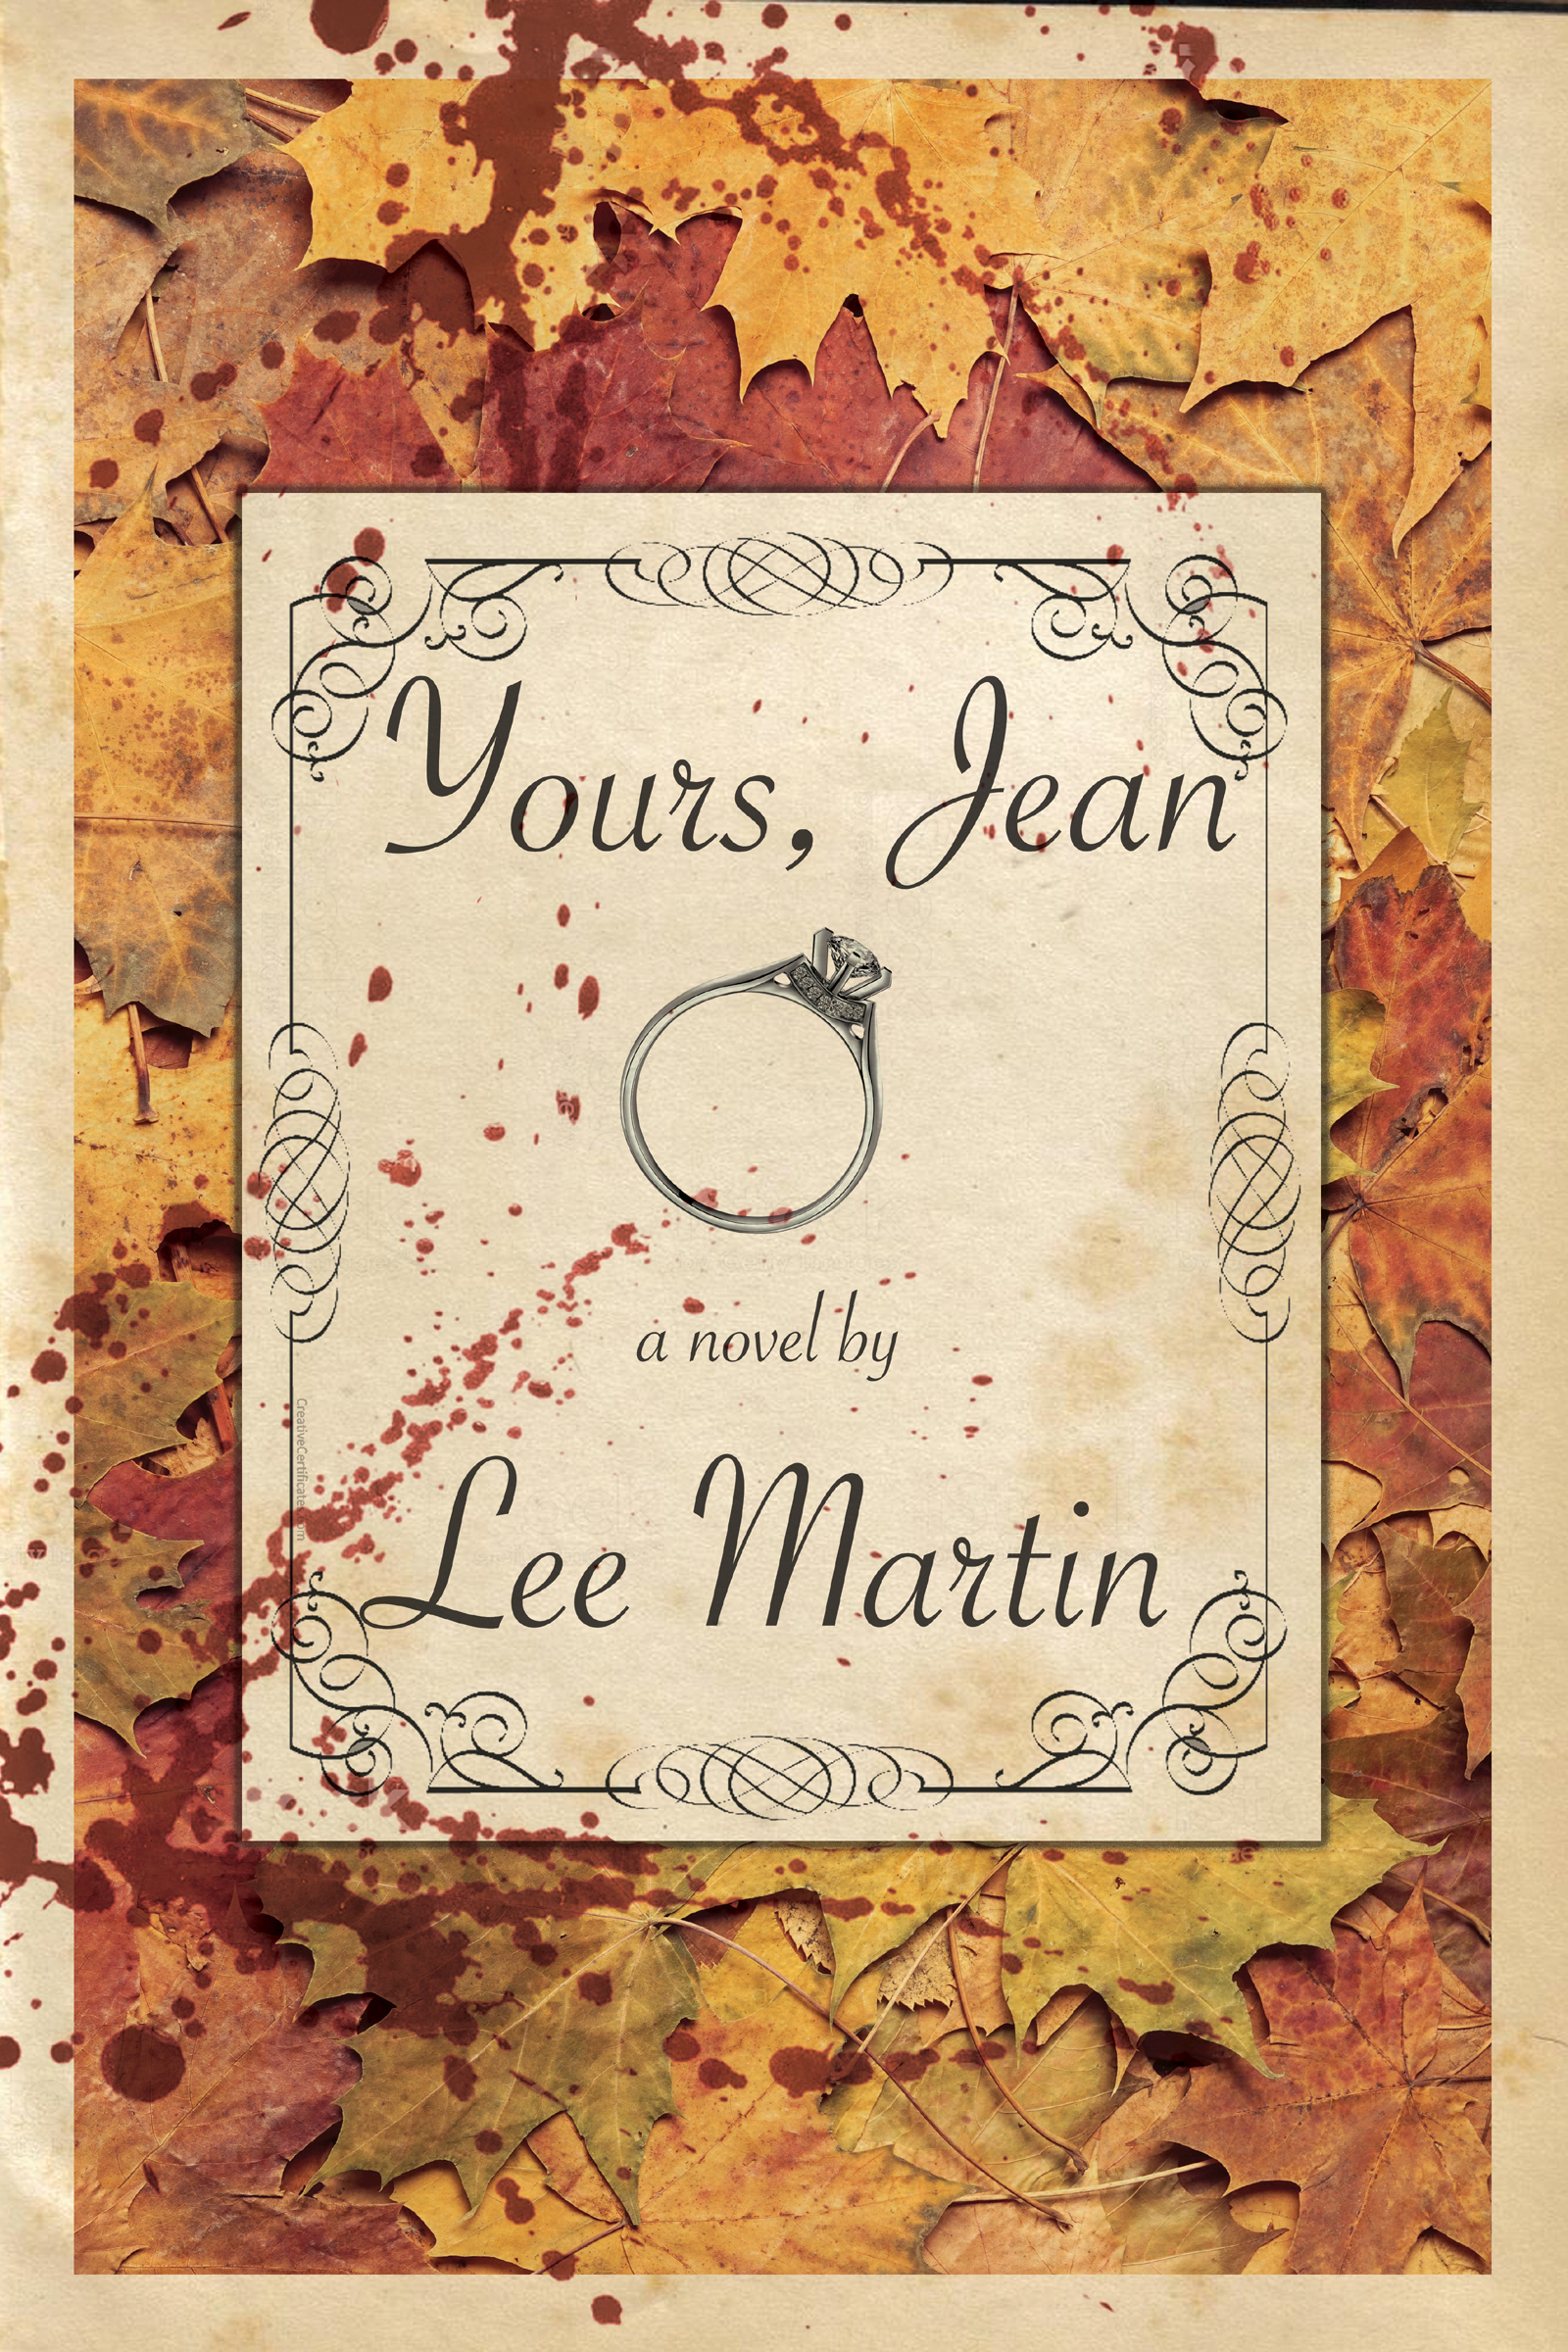 Yours, Jean: A Novel